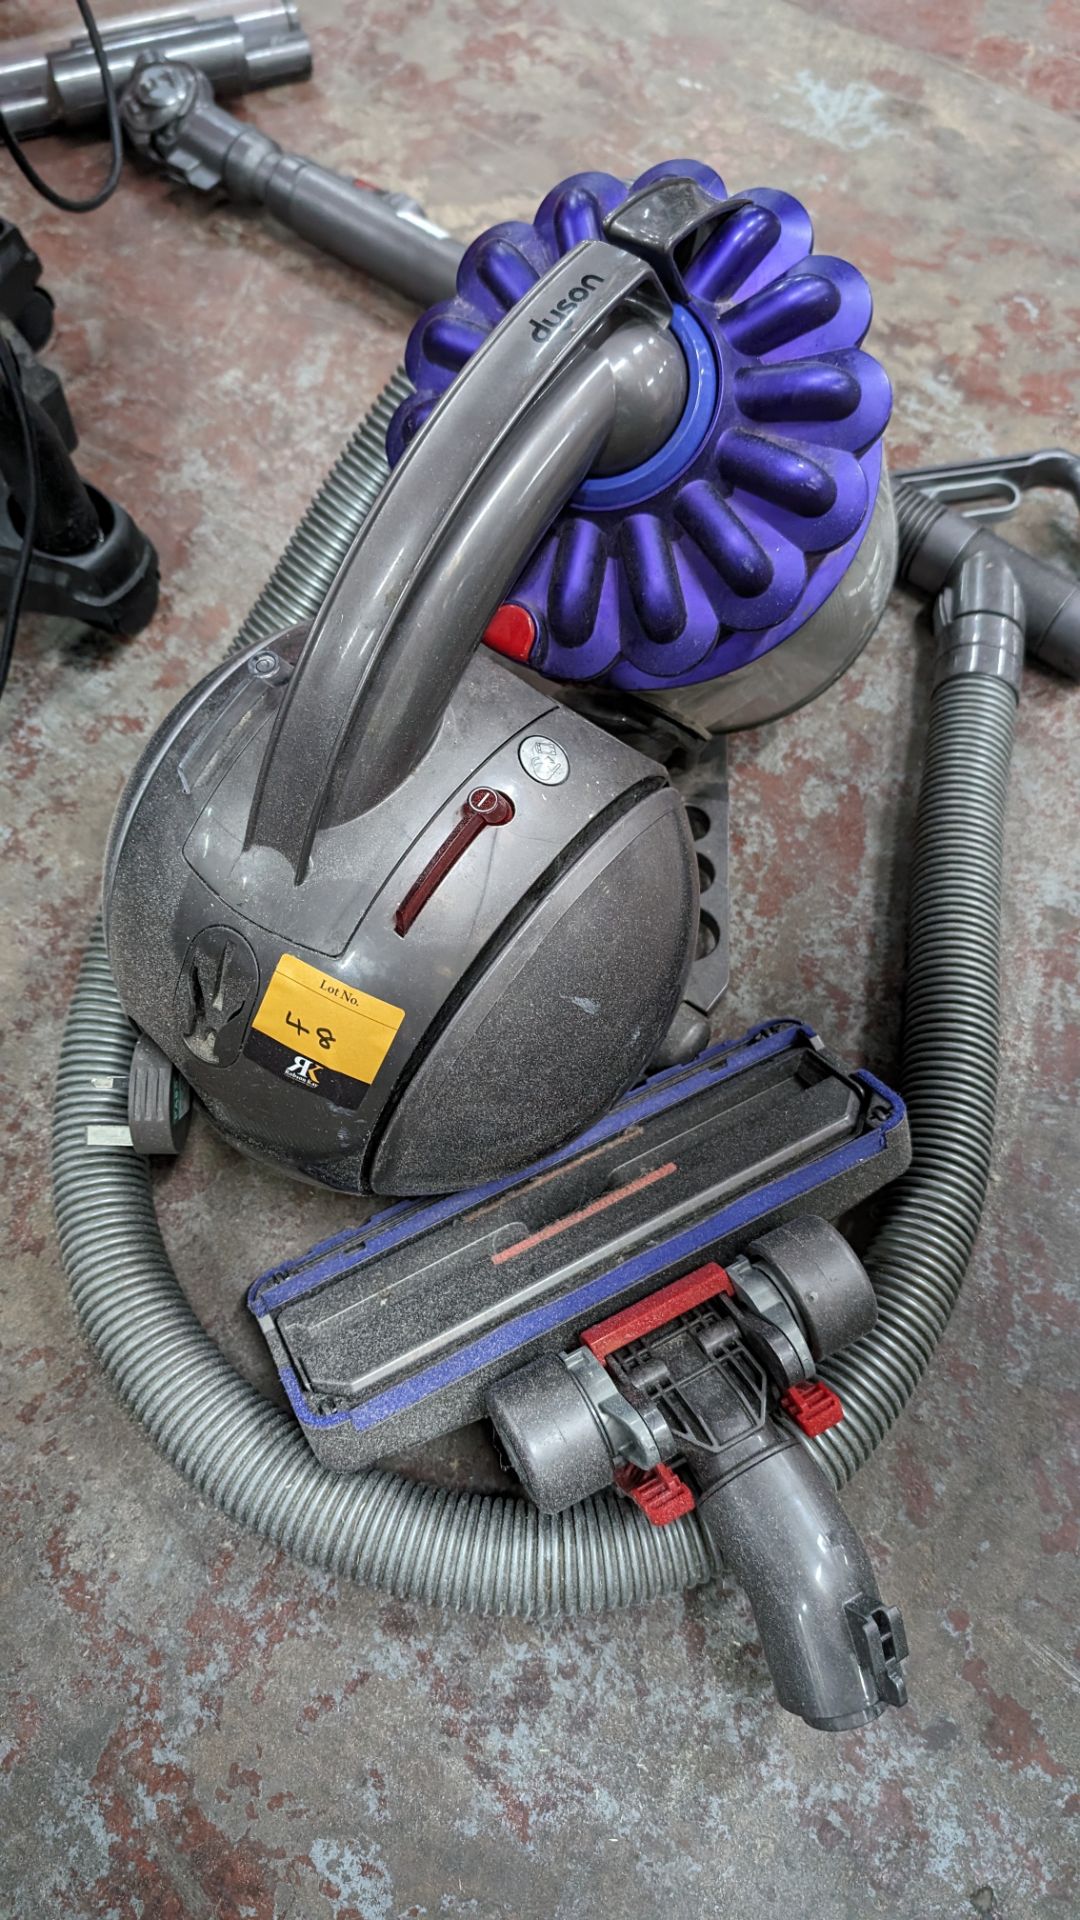 Dyson vacuum cleaner - Image 6 of 7